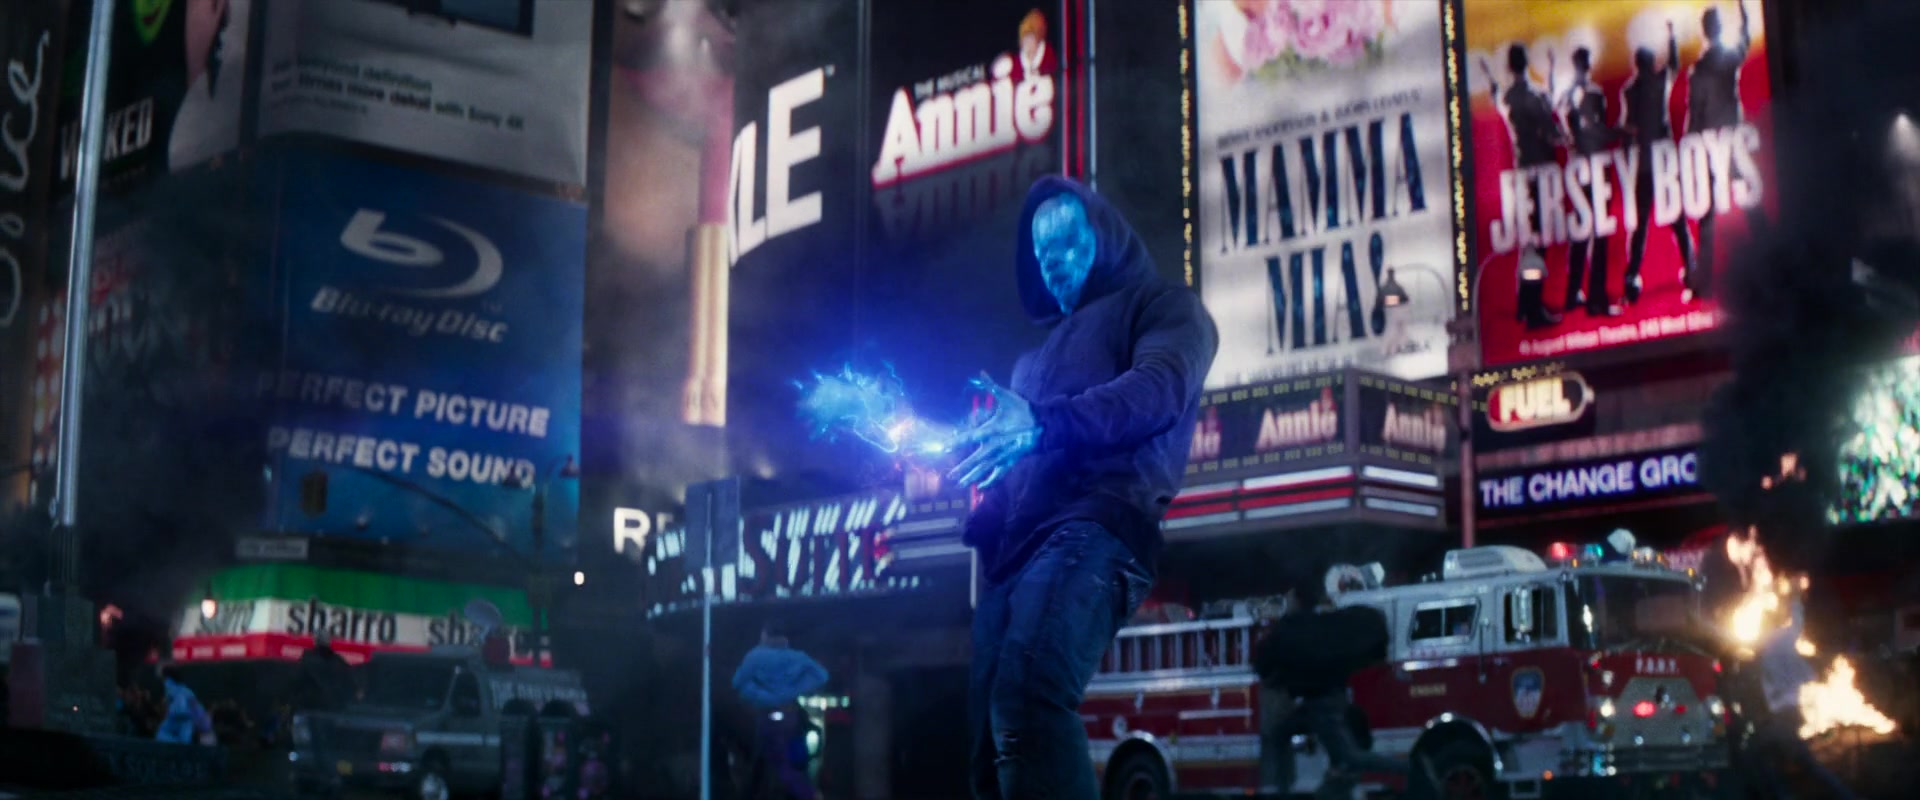 Blu-ray Disc And Sbarro Pizzeria In The Amazing Spider-Man 2 (2014)